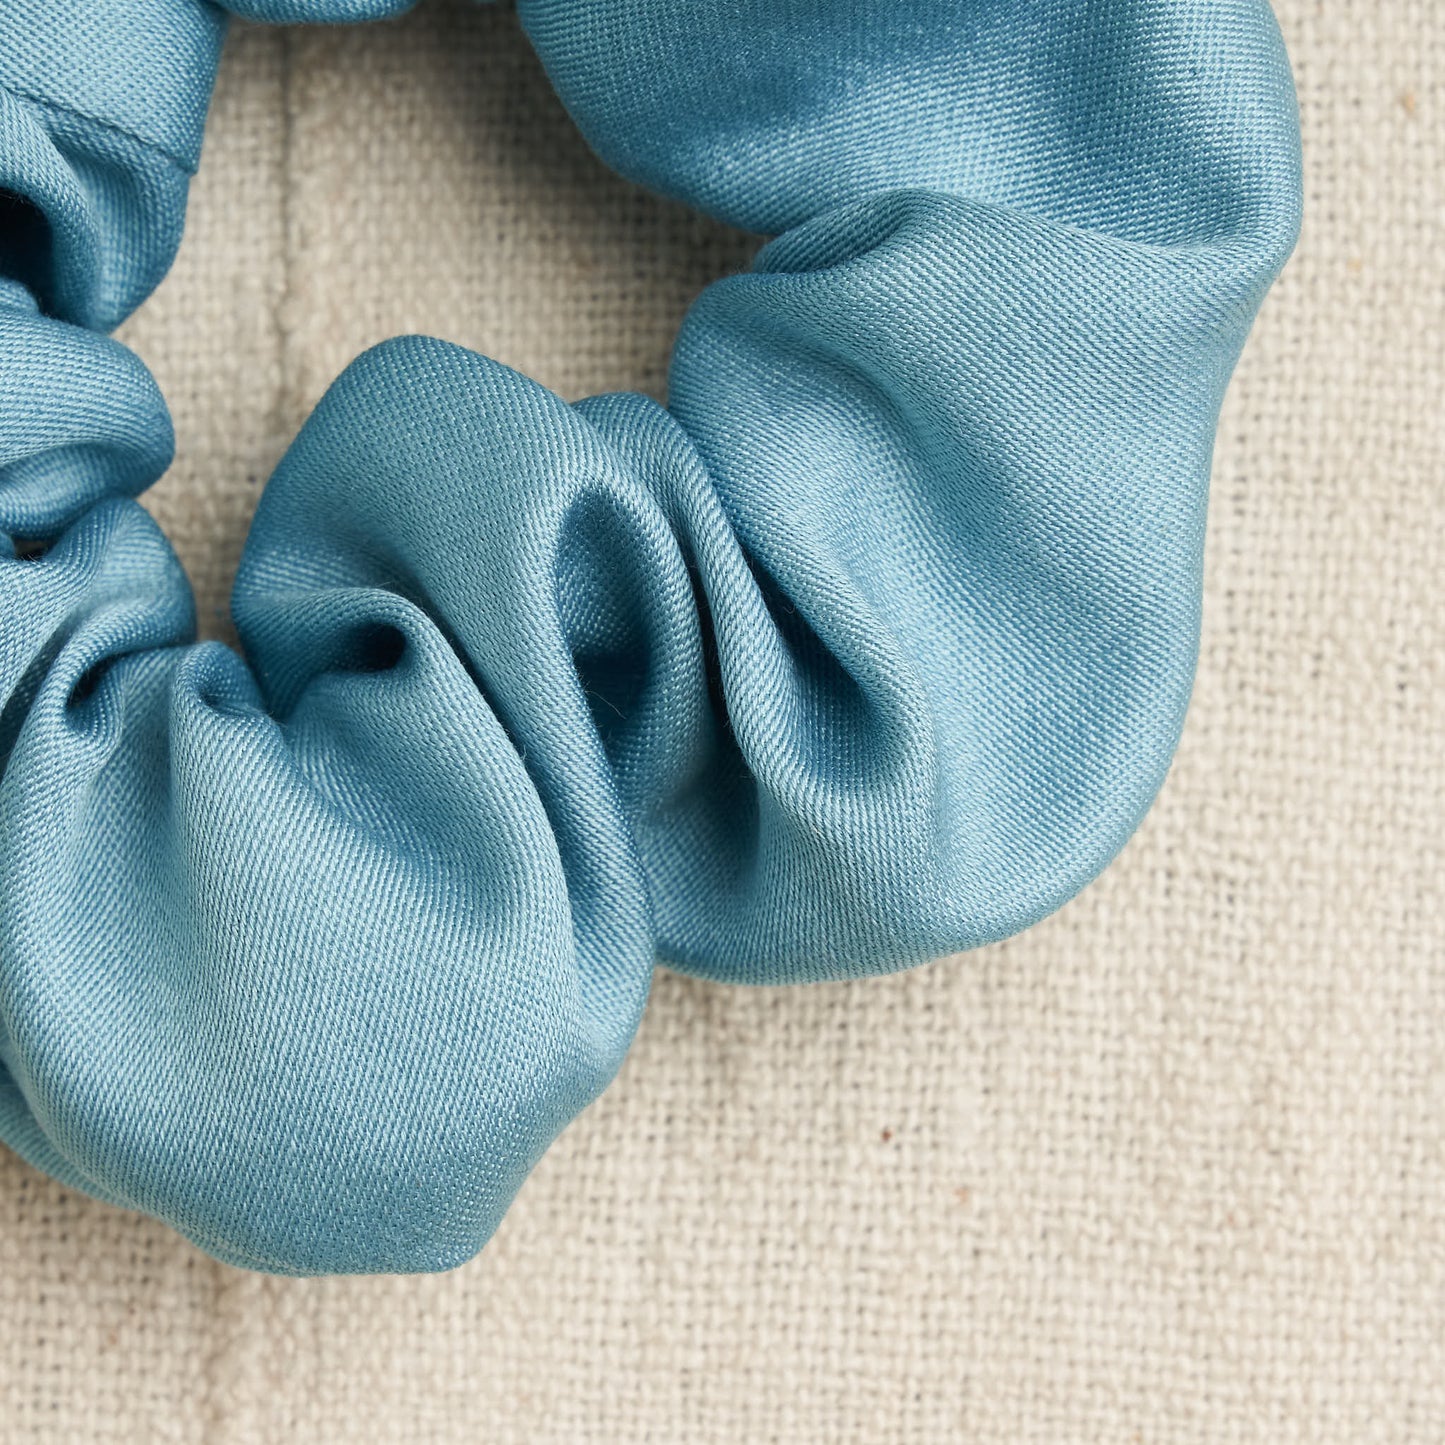 Naturally Dyed Silk Scrunchie